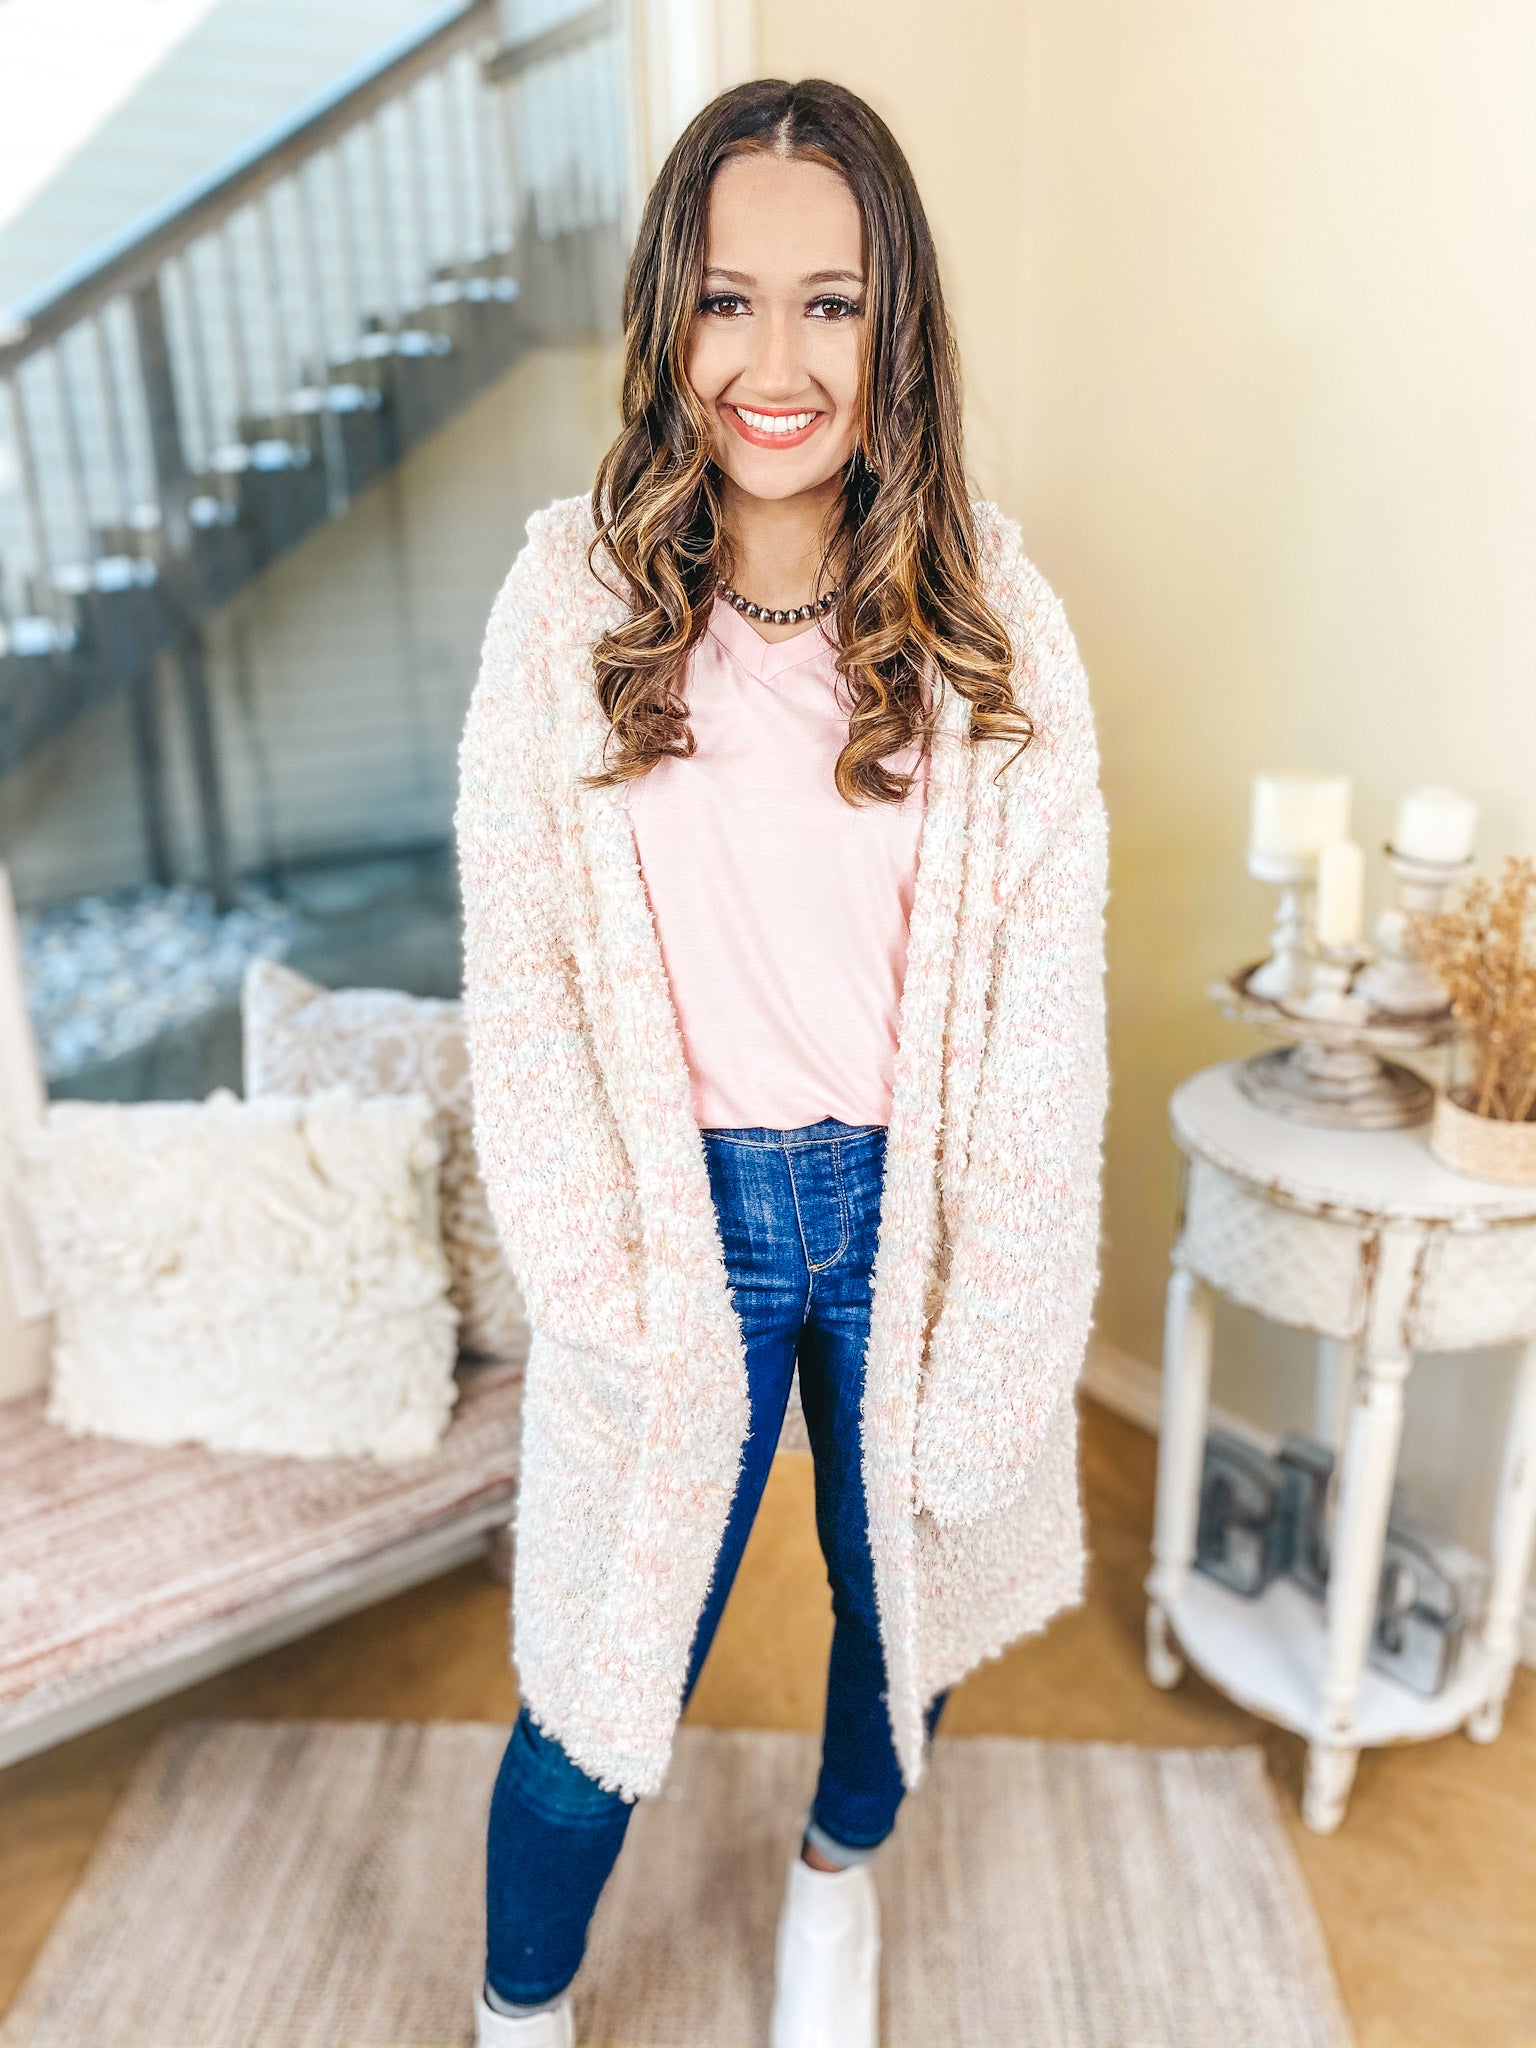 Cotton Candy Dreams Hooded Cardigan with Pastel Multi Stitching in Ivory - Giddy Up Glamour Boutique